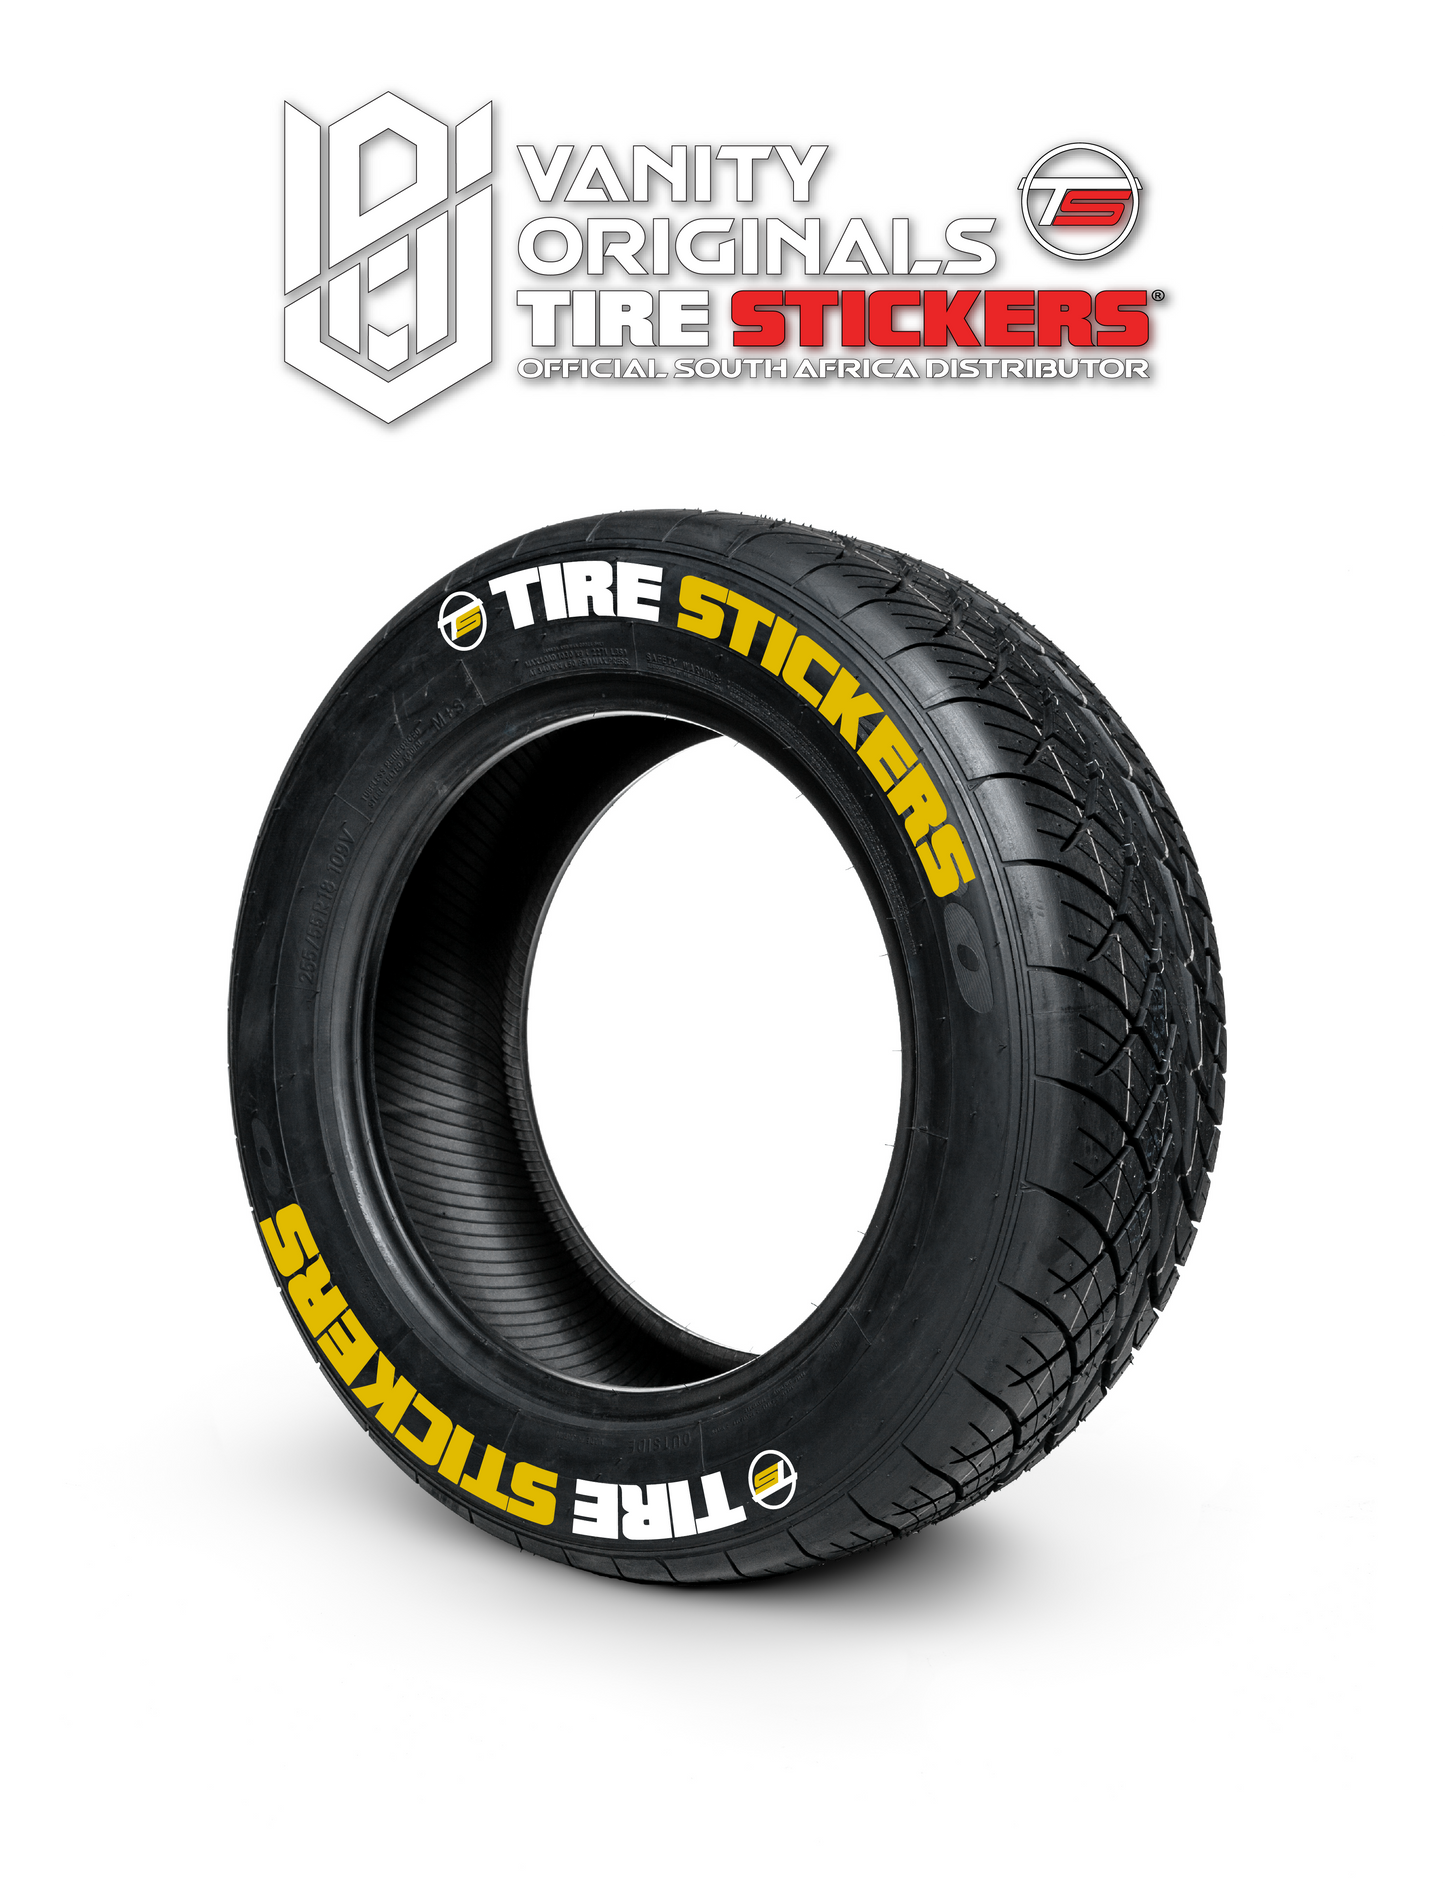 Tire Stickers ( 8x Rubber Decals, Adhesive & Instructions Included )